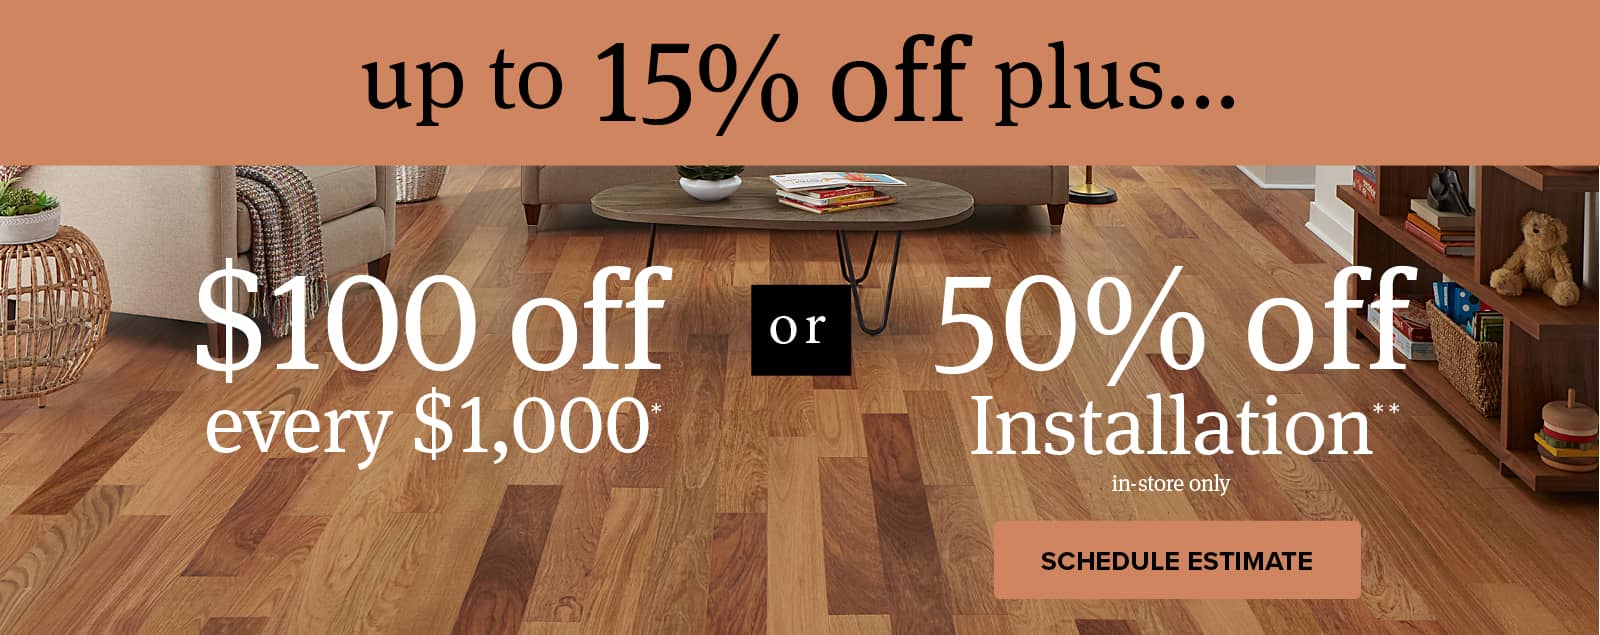 up to 15 percent off plus $100 off every $1000 or 50 percent off installation in store only schedule estimate